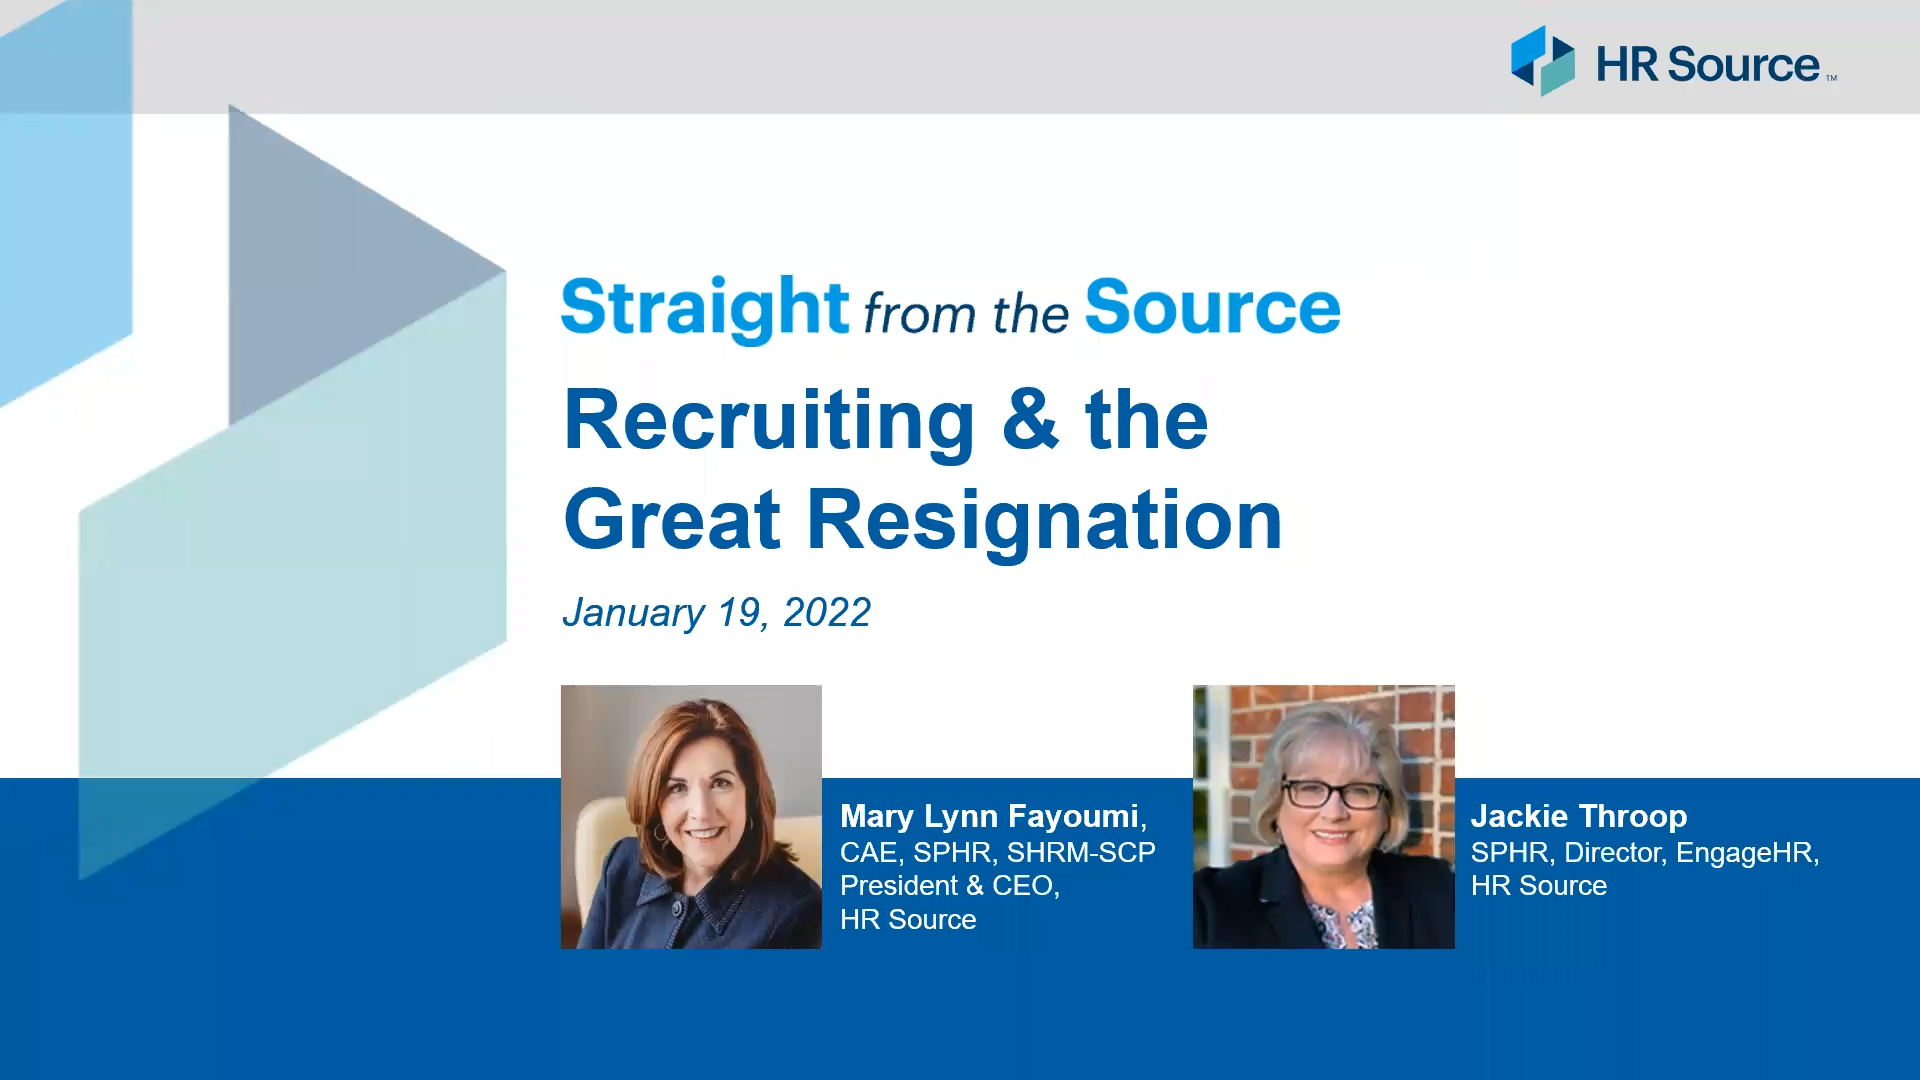 Straight from the Source: Recruiting & the Great Resignation